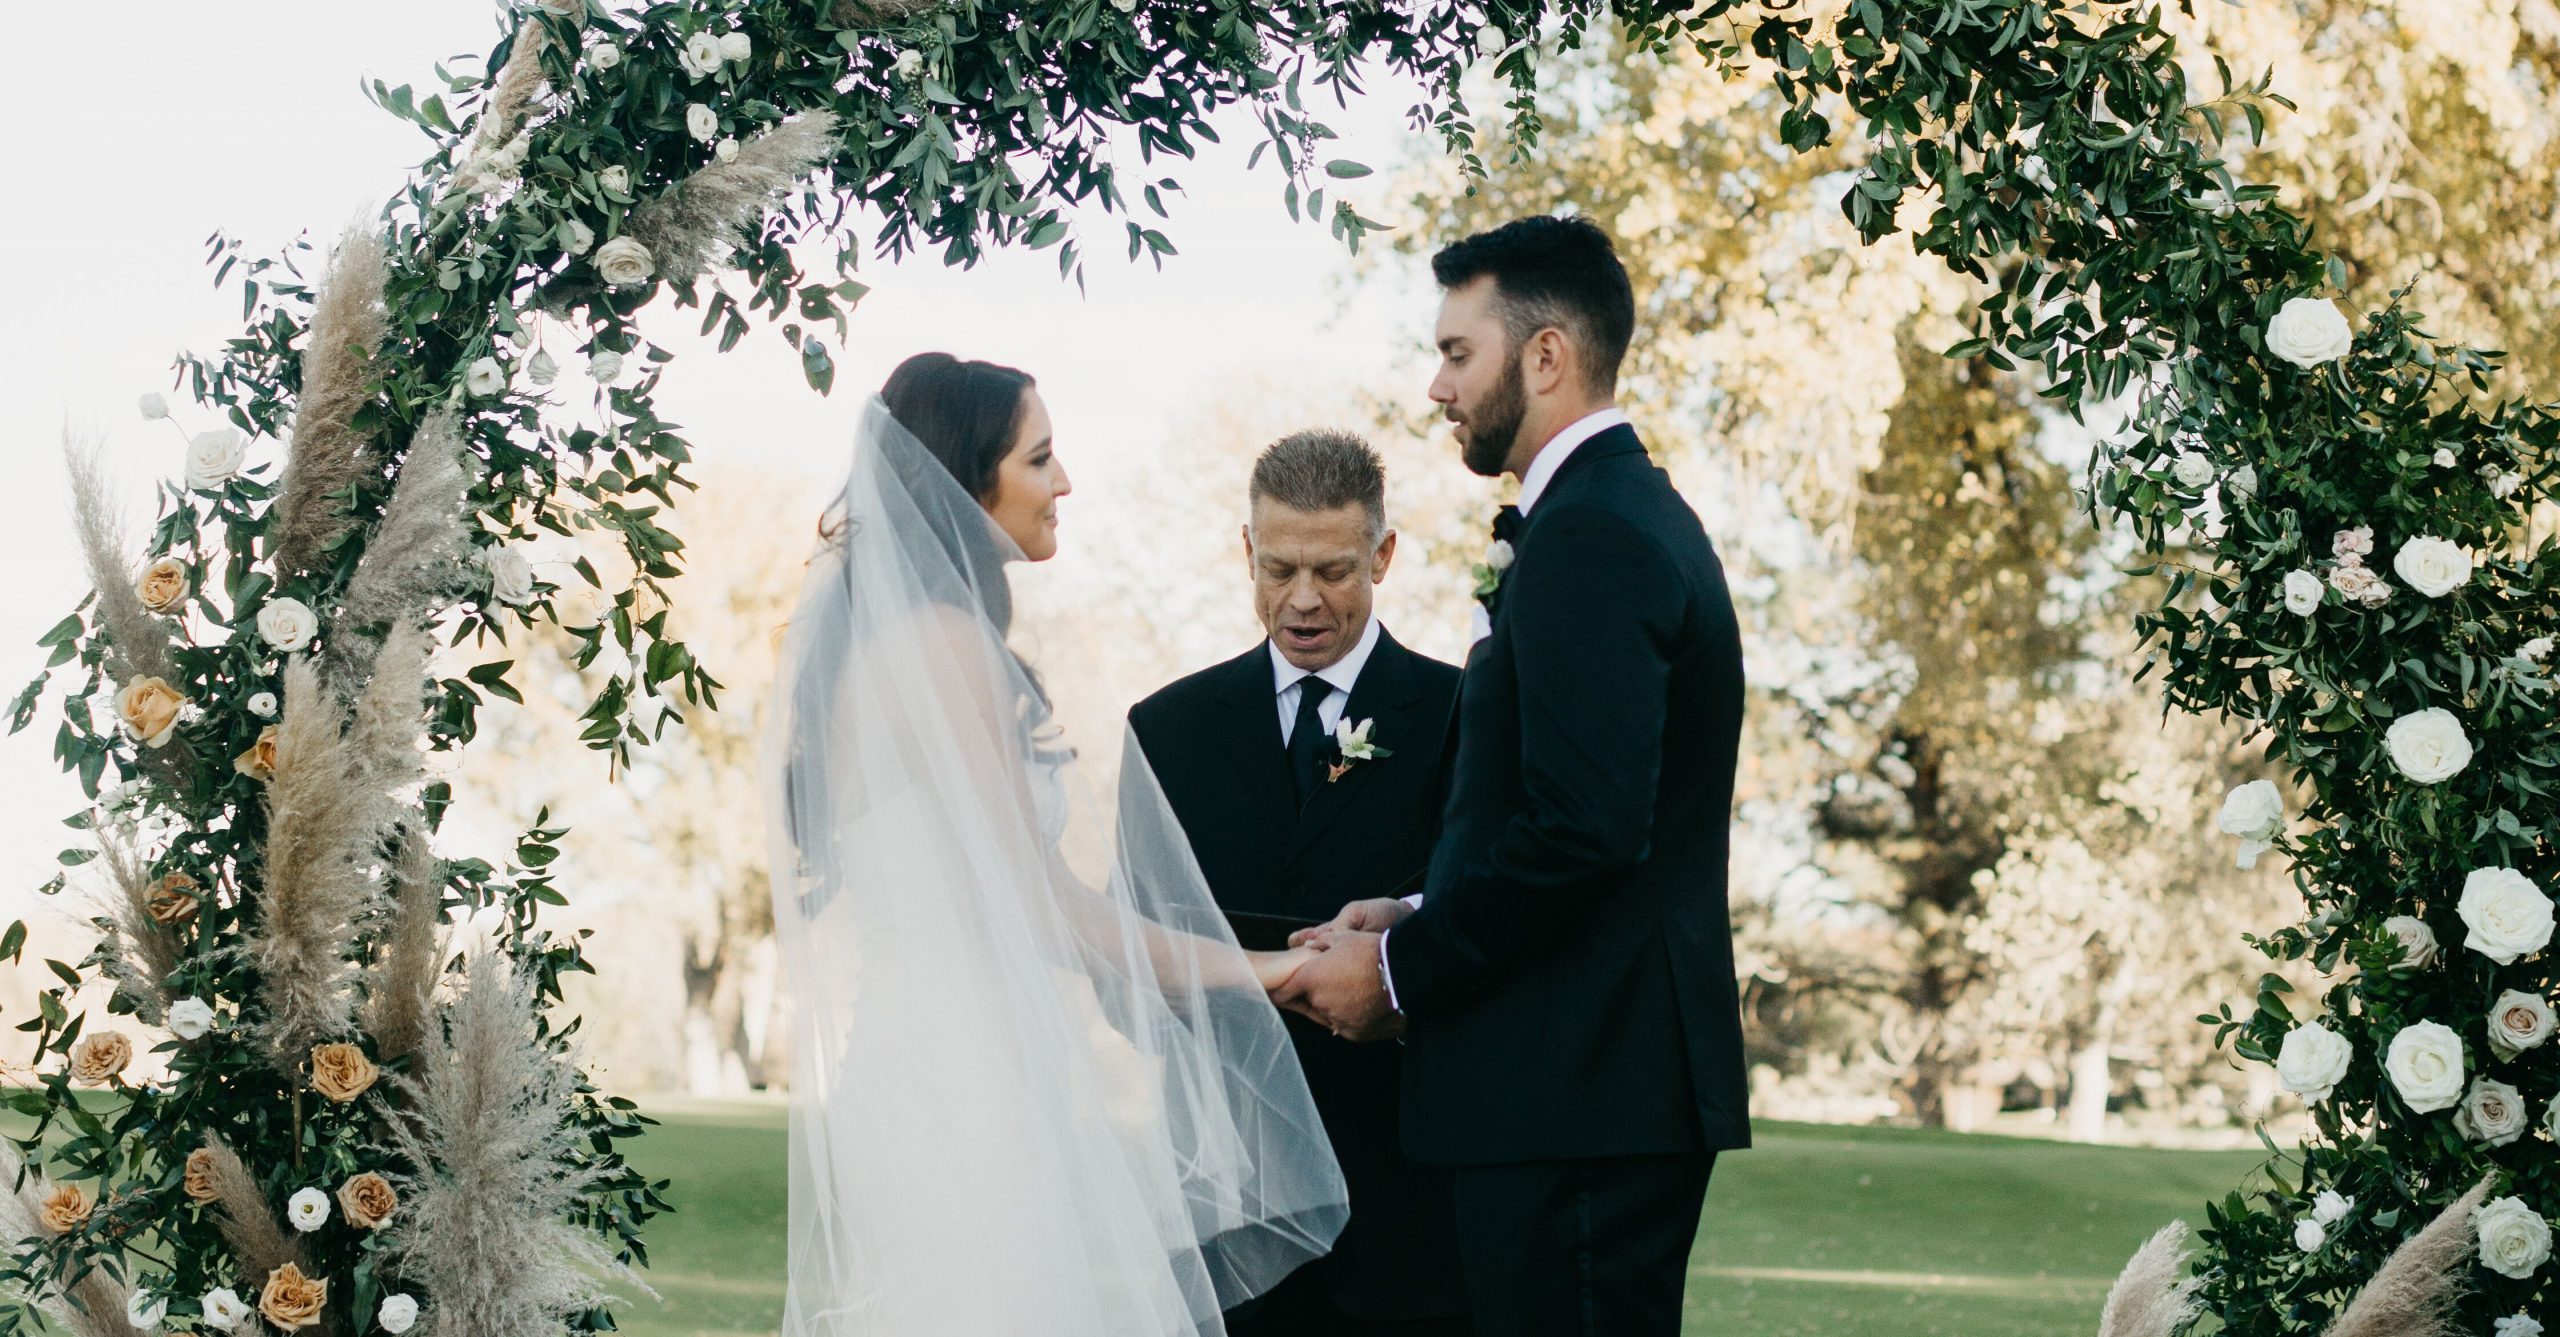 How to Become a Wedding Officiant